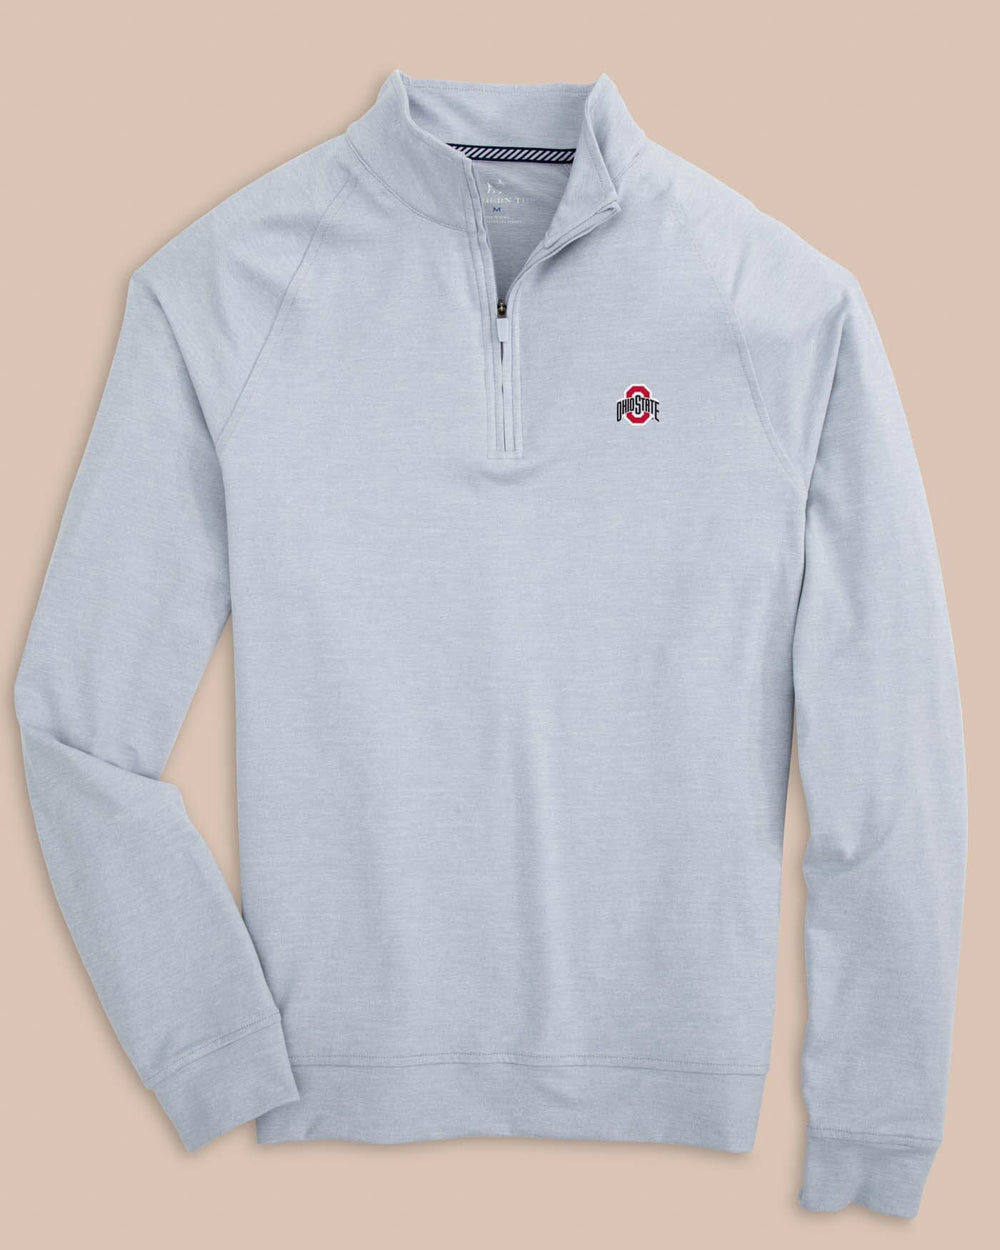 The front view of the Ohio State Buckeyes Cruiser Heather Quarter Zip Pullover by Southern Tide - Heather Slate Grey